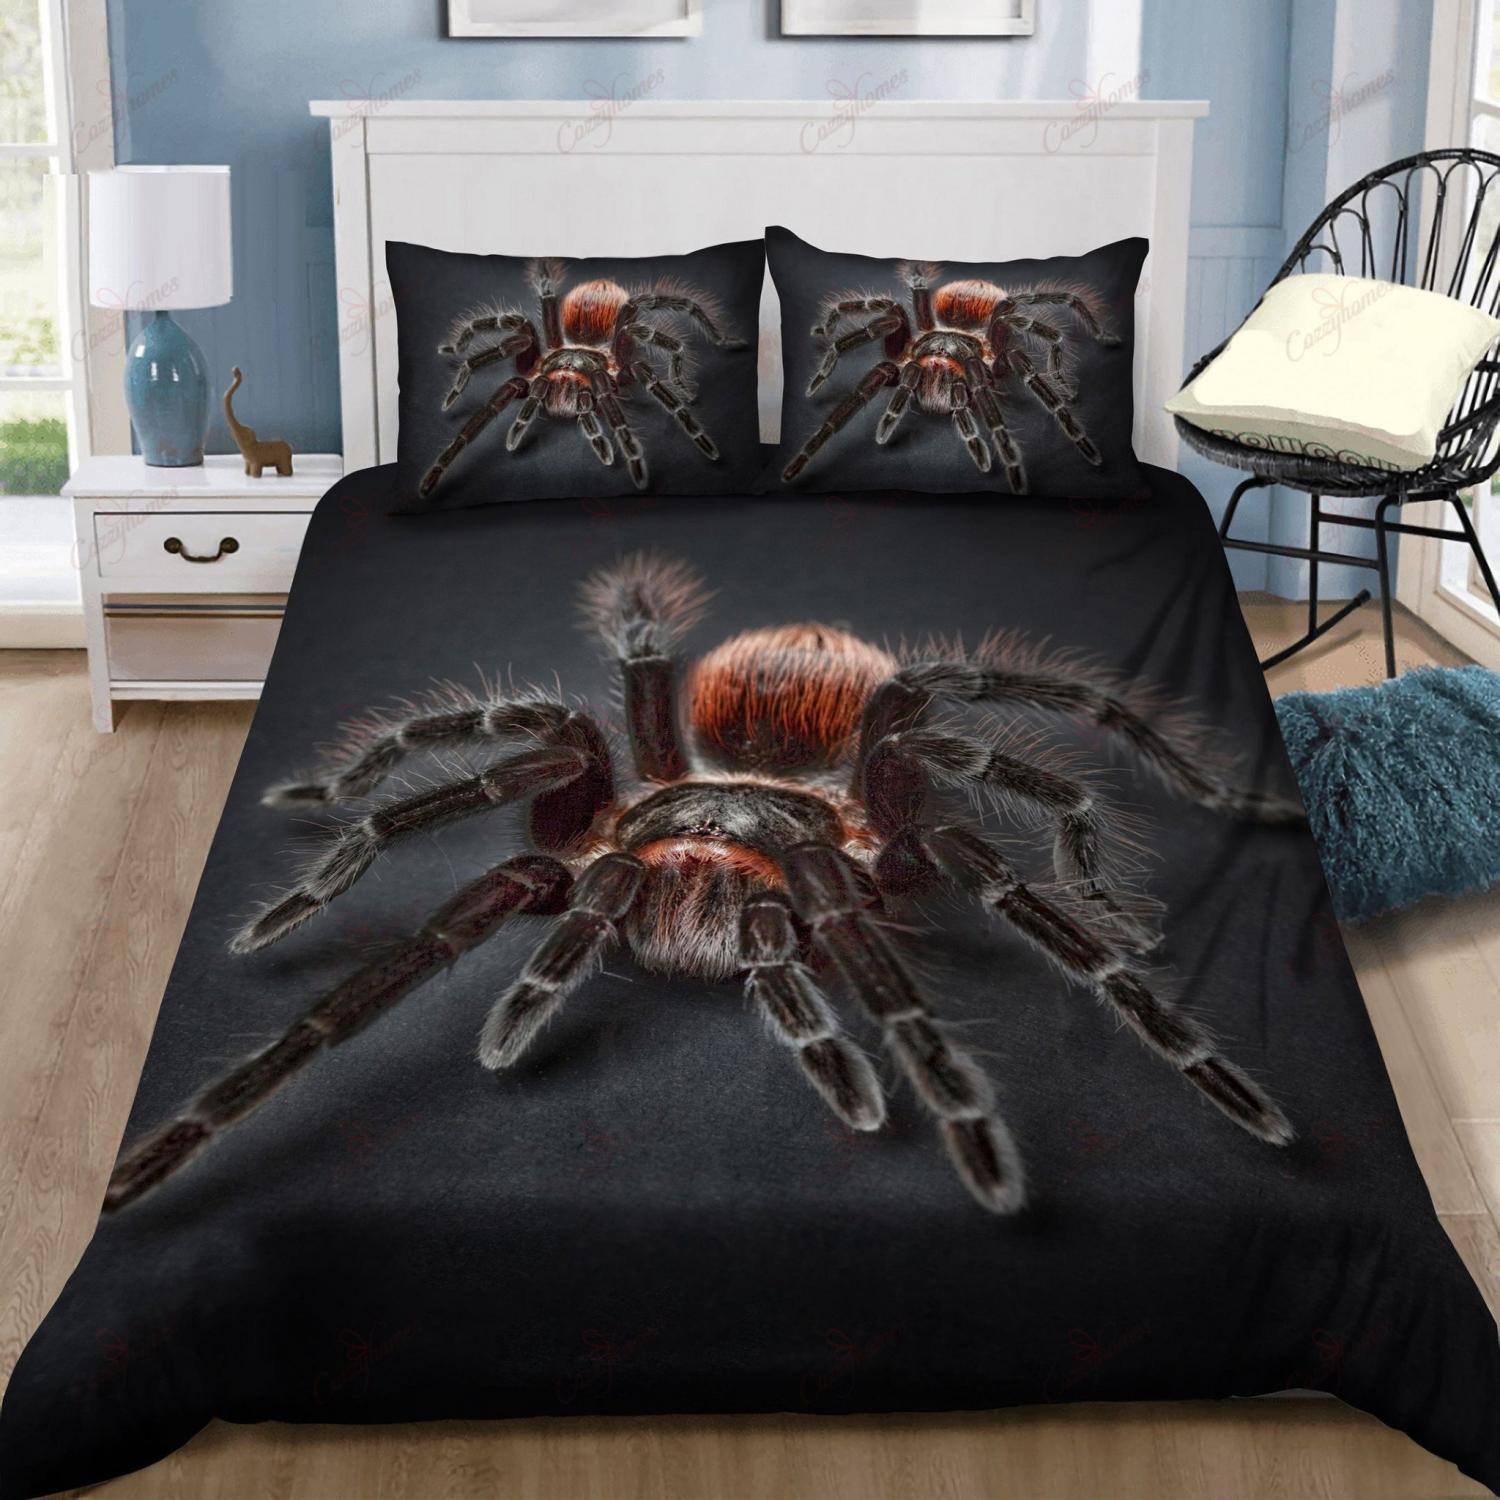 Giant red and black colored 3d spider with black bg bedsheet